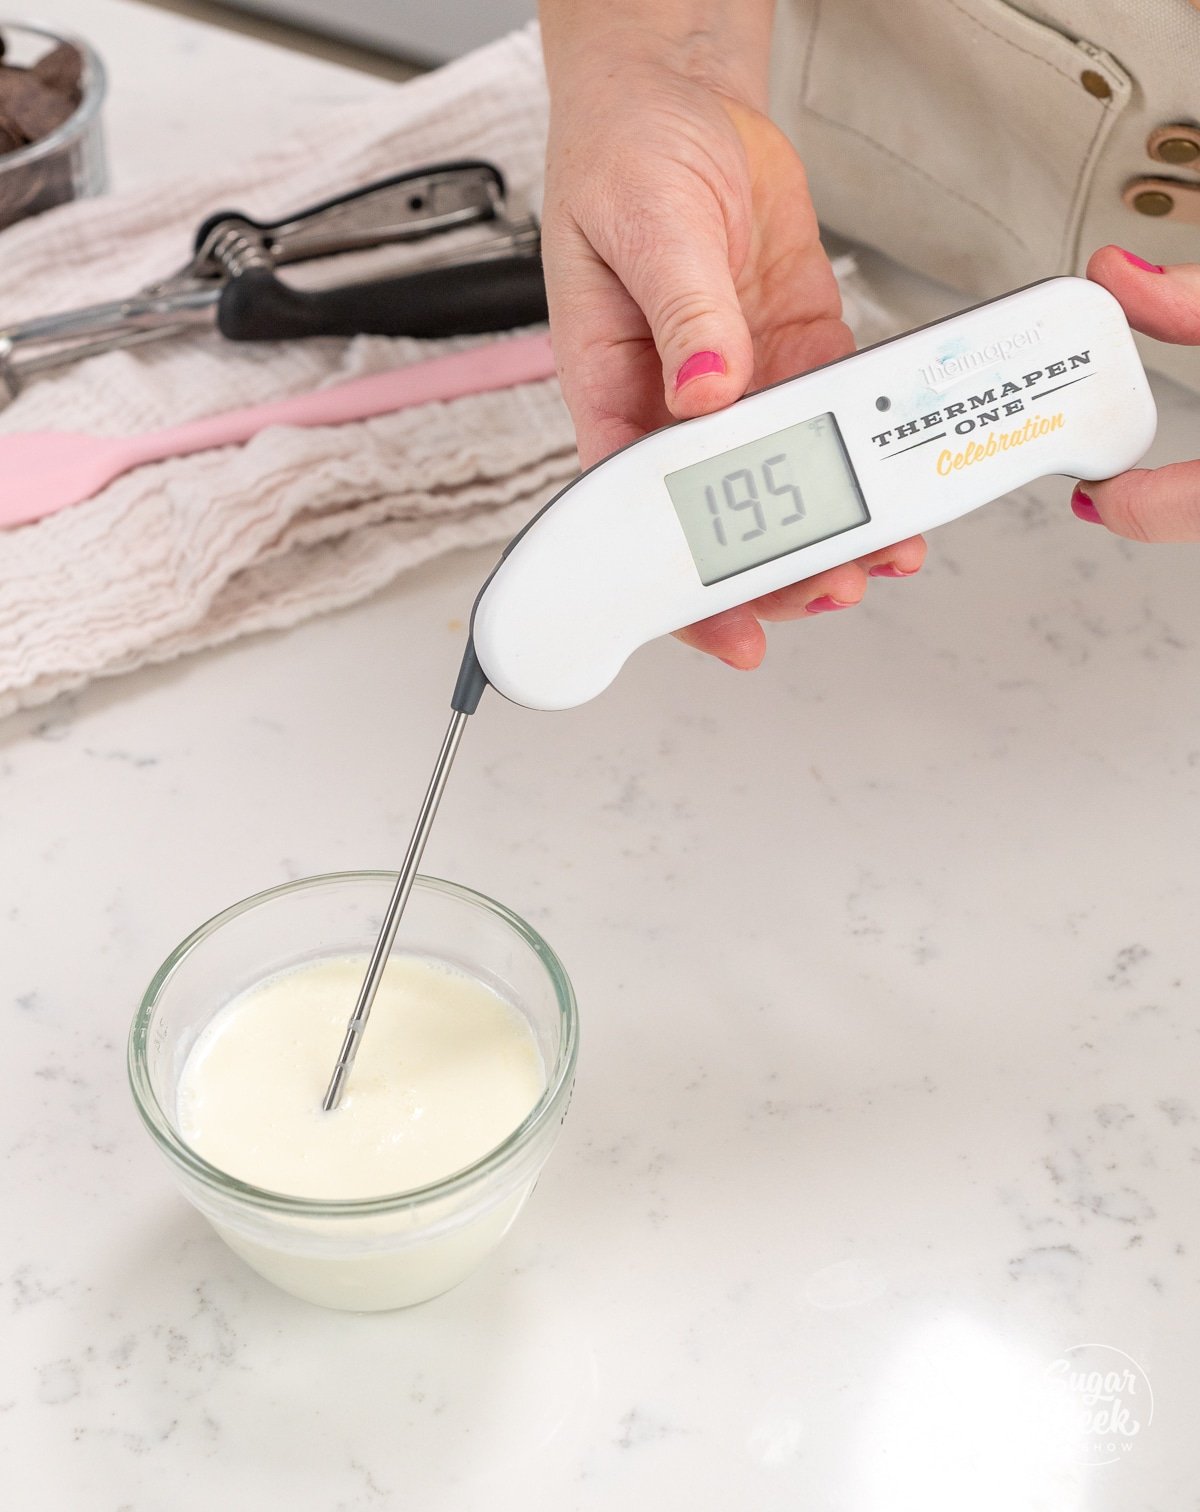 hand getting the temperature of a bowl of cream with a thermometer